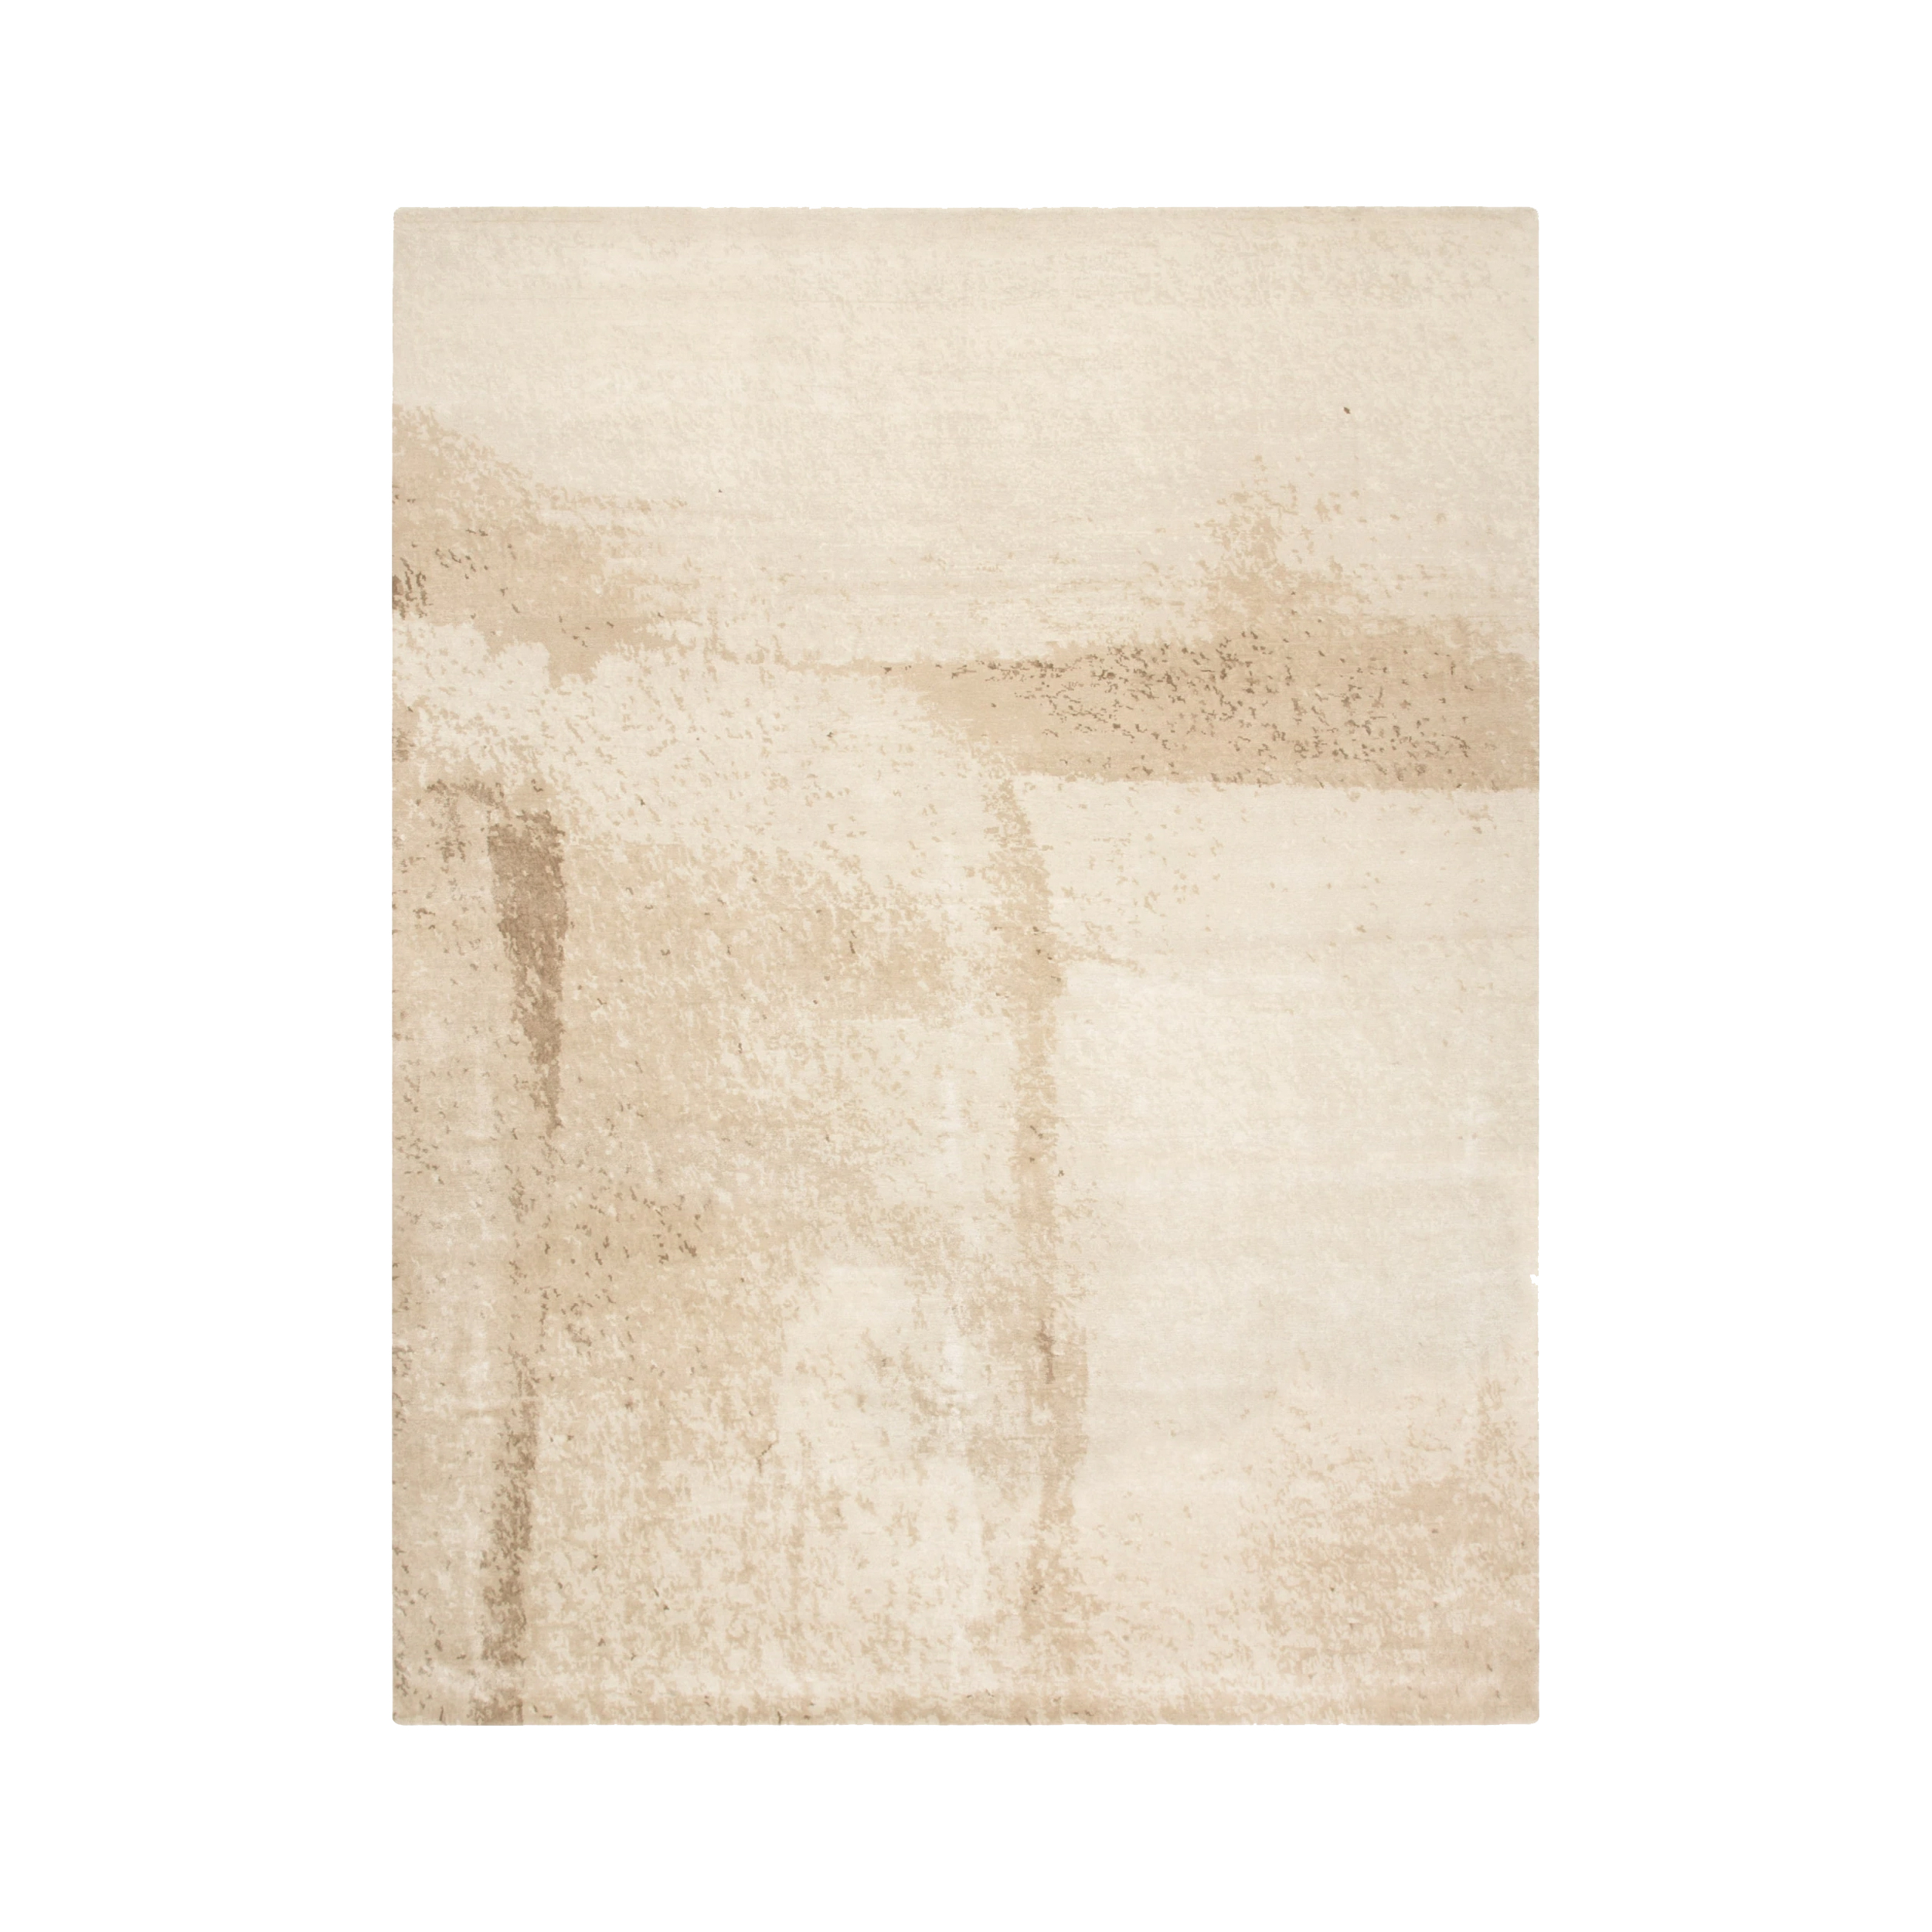 Canyon rug, inspired by Mark Rothko and his colour field paintings, is a contemporary design of beige tones. 